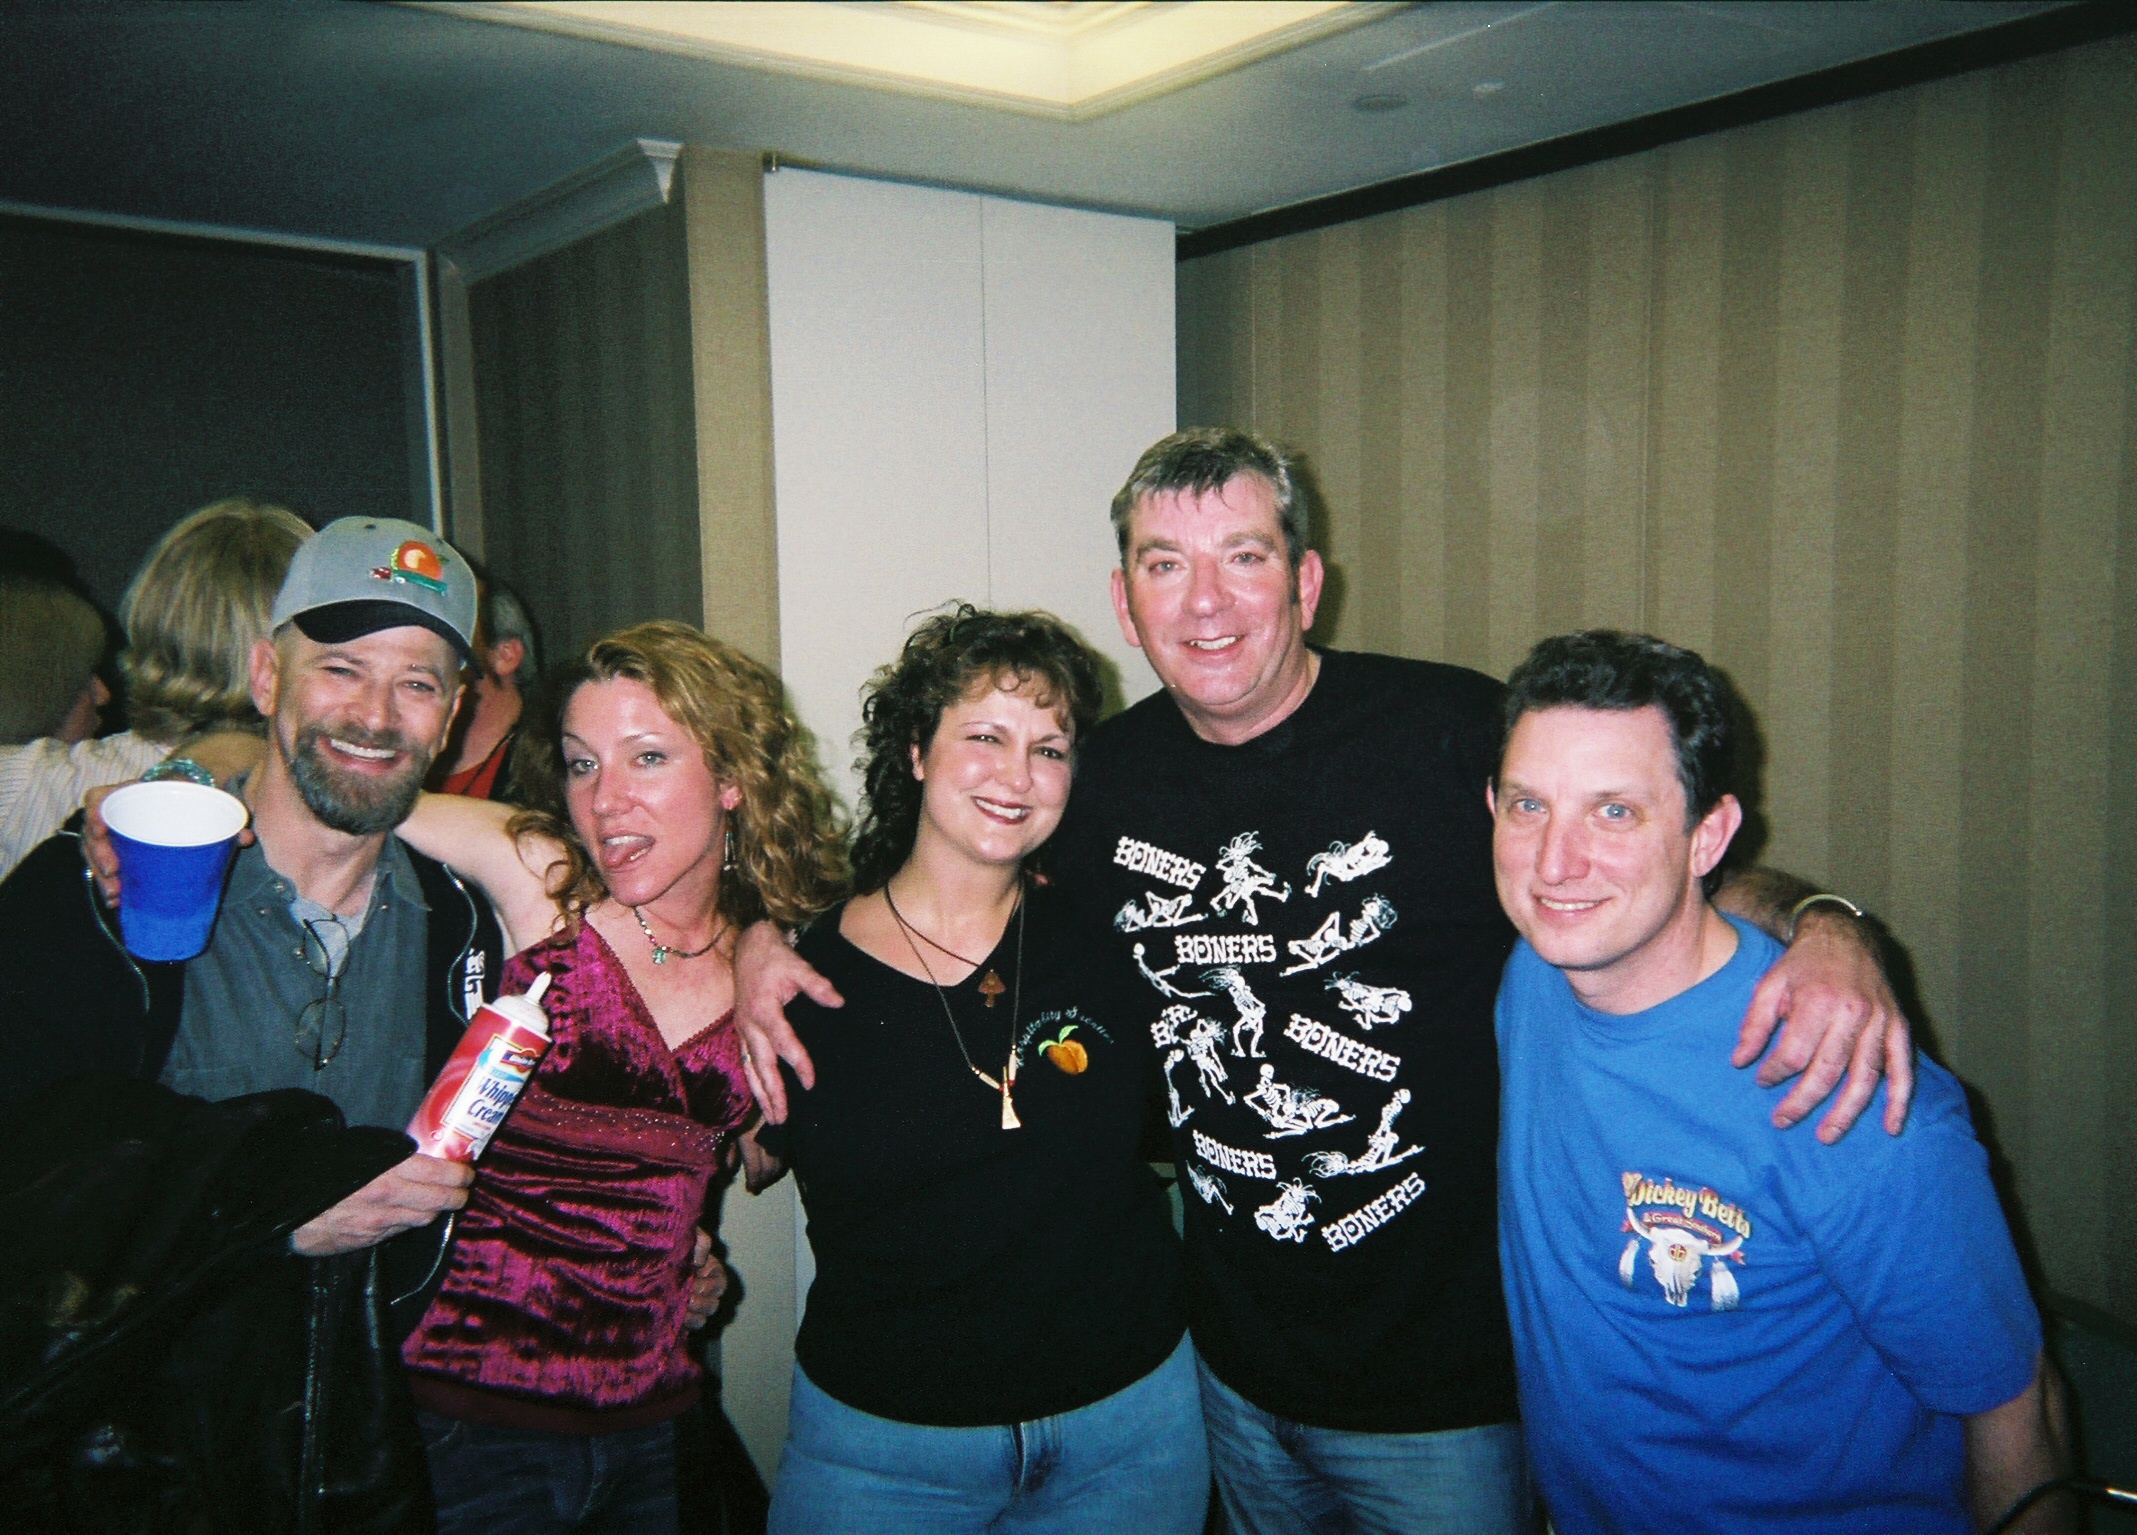 Peachnutt, Schnelle, Jacquie, Colin and Barry at the HTN party 3-11-06